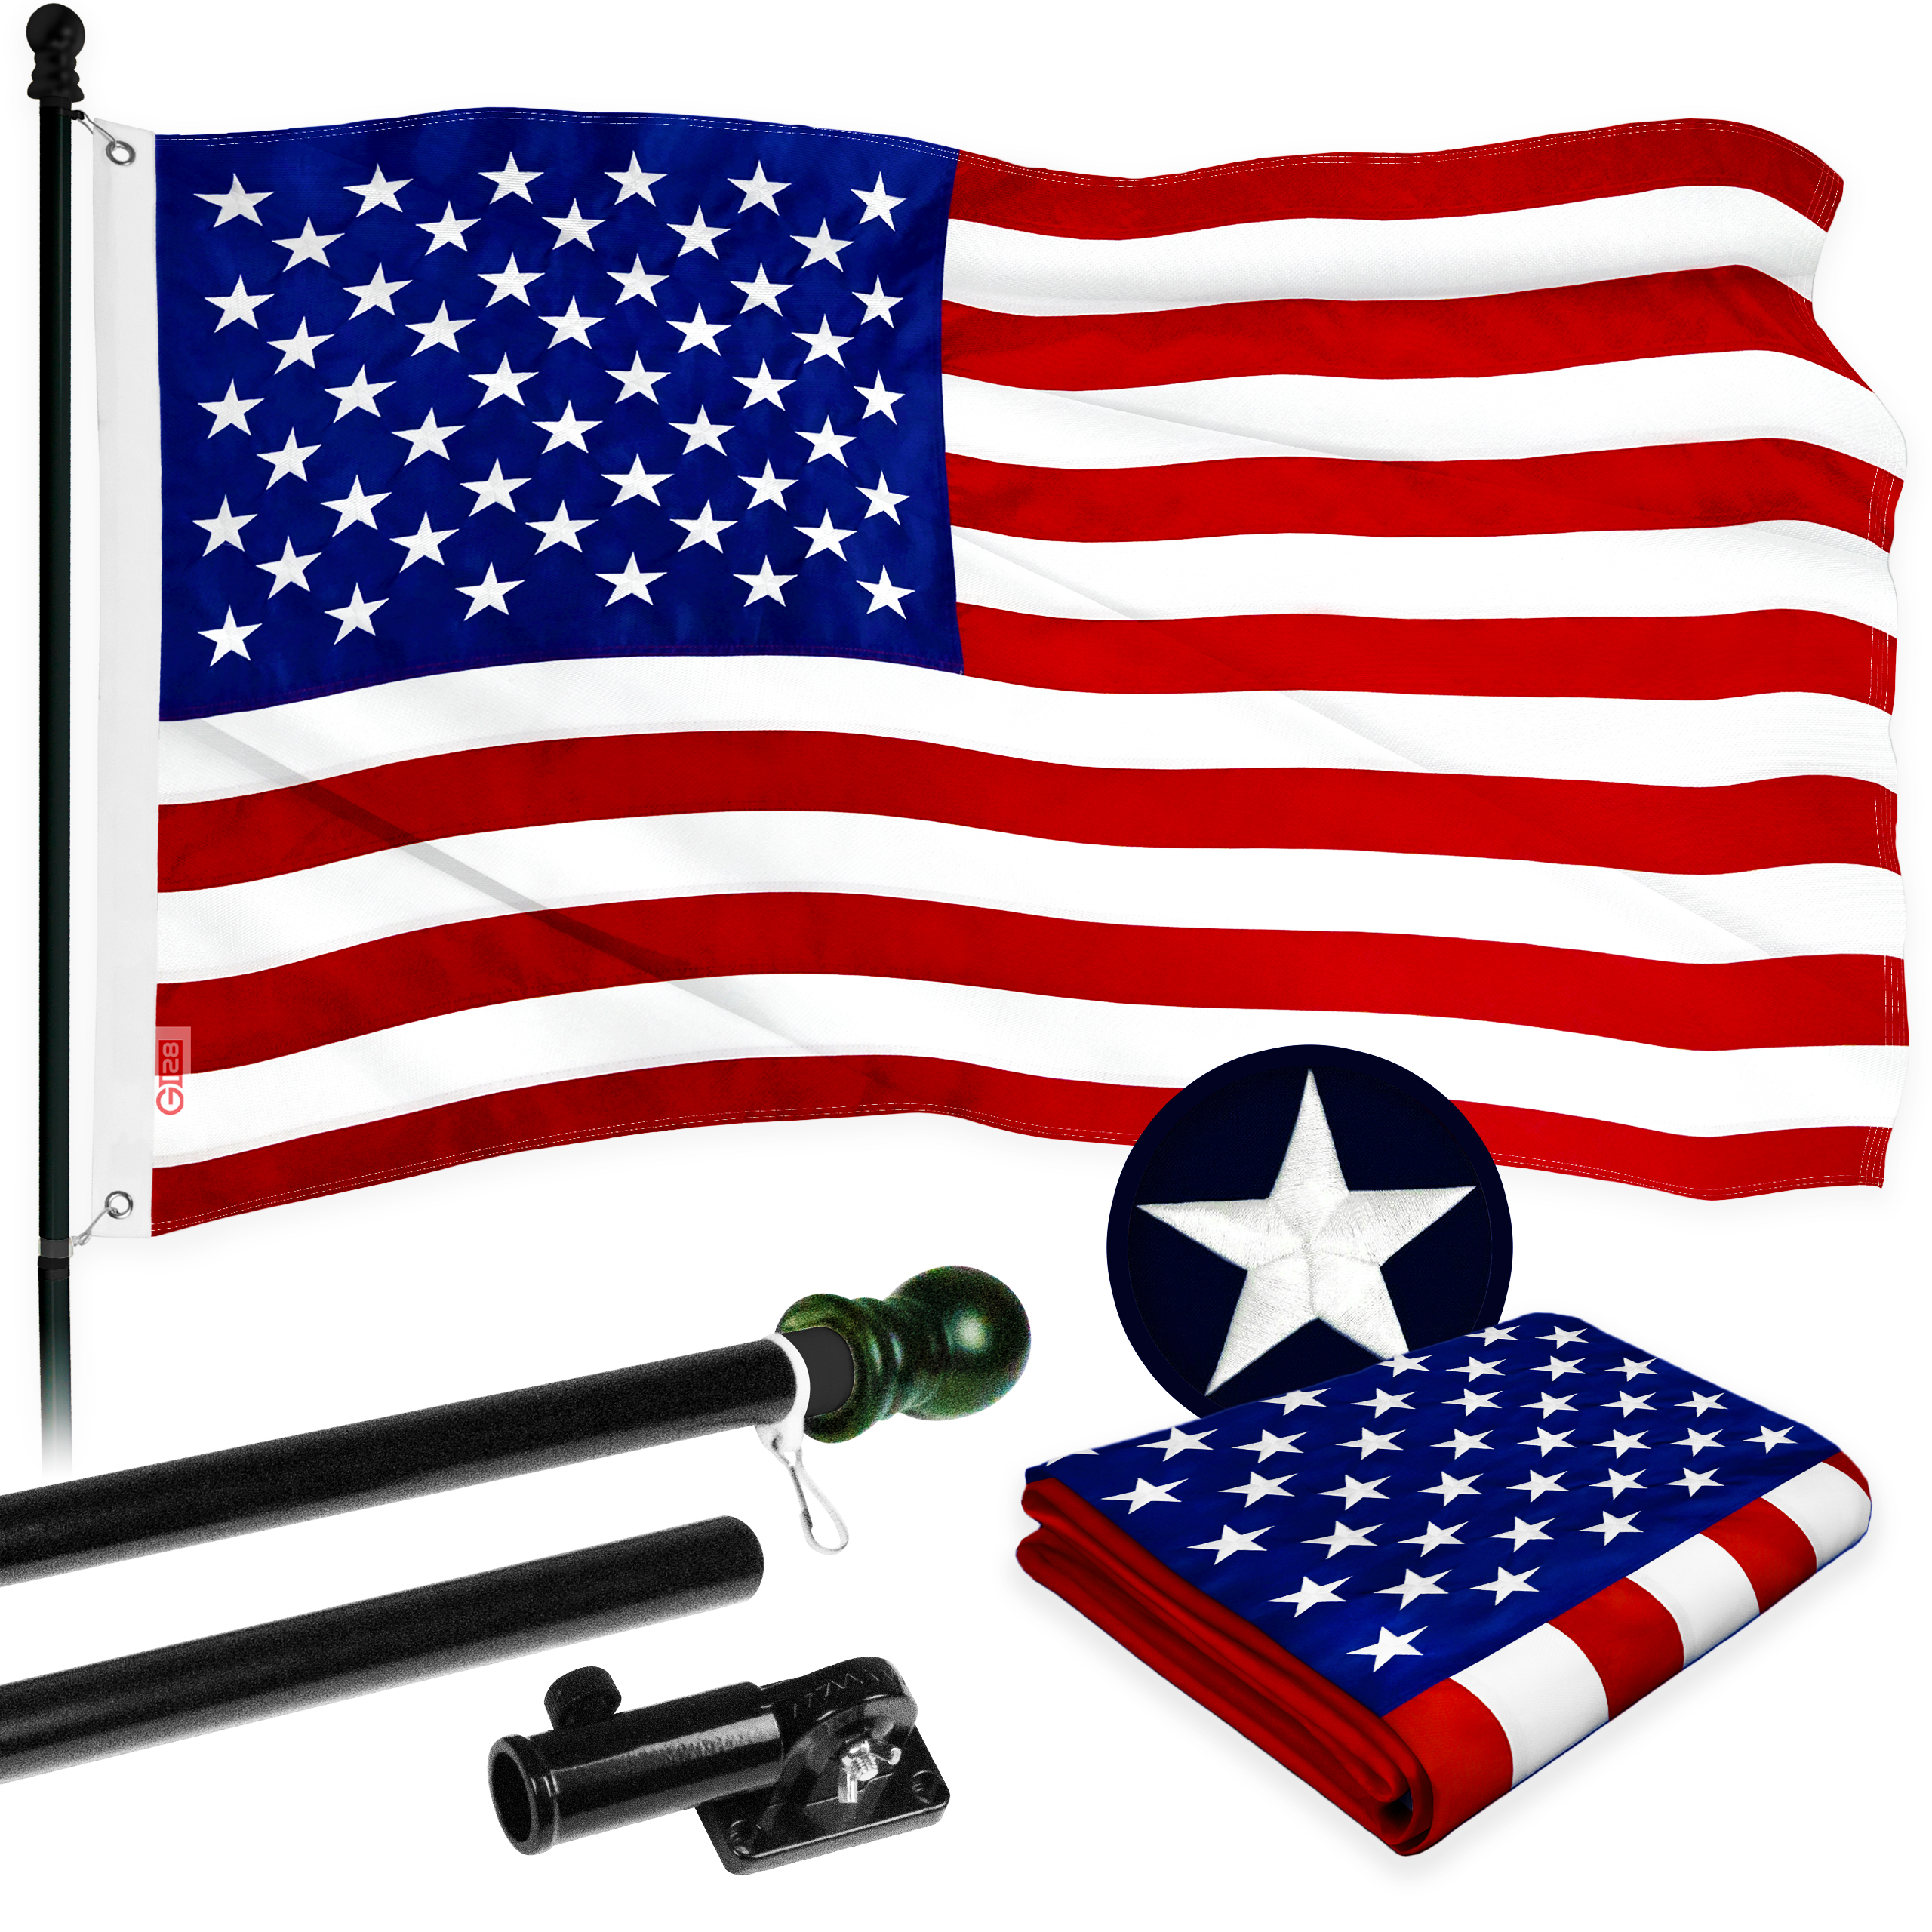 G128 - 5 Feet Tangle Free Spinning Flagpole (Black) American Flag Brass Grommets Embroidered 2.5x4 ft American Flag Brass Grommets (Flag Included) Aluminum Flag Pole - image 1 of 8